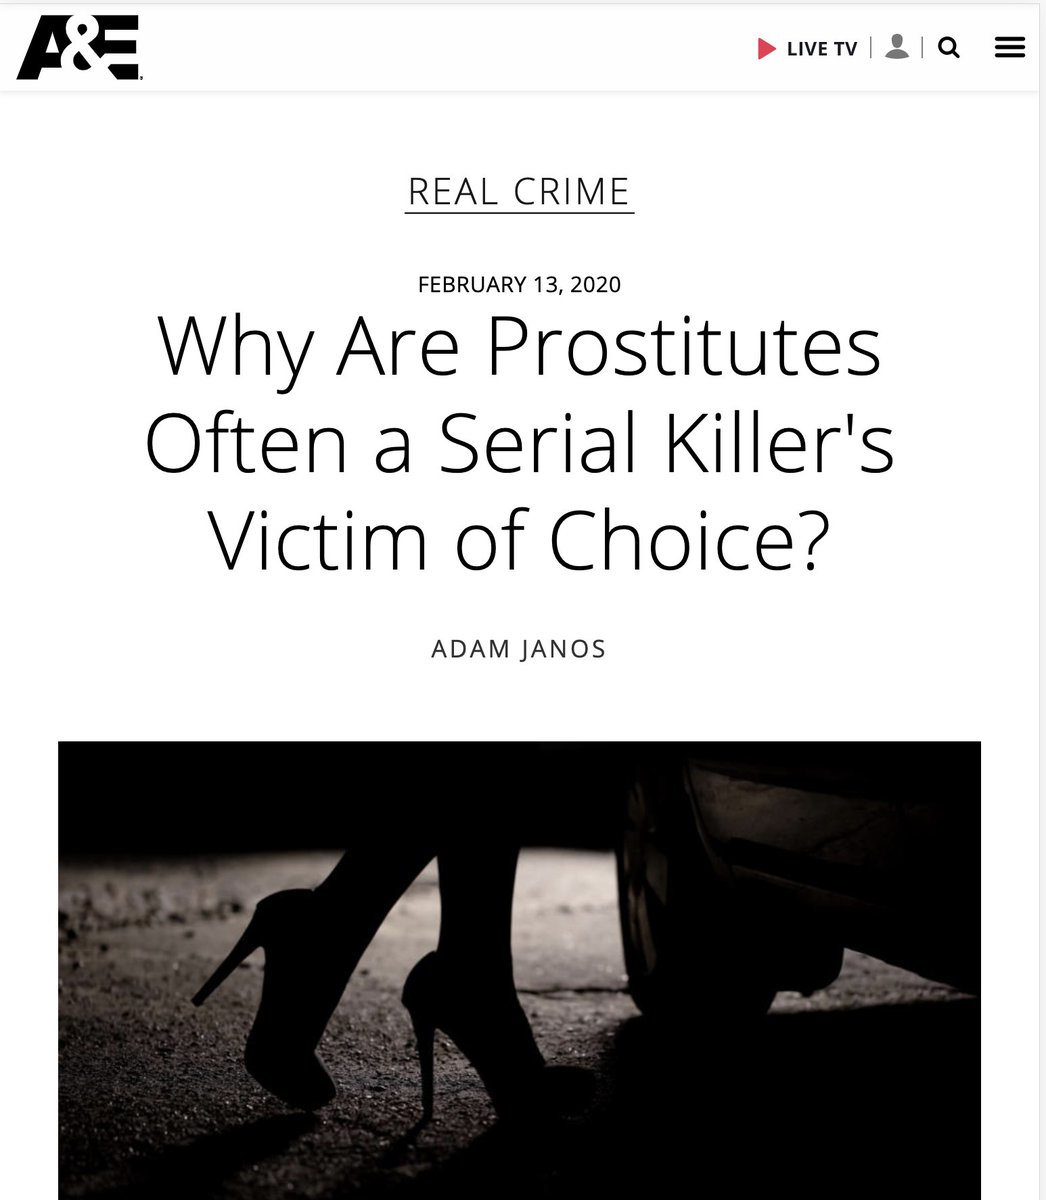 There is no other "profession" that has this risk. Human bodies are not workplaces. https://www.aetv.com/real-crime/why-do-serial-killers-target-sex-workers